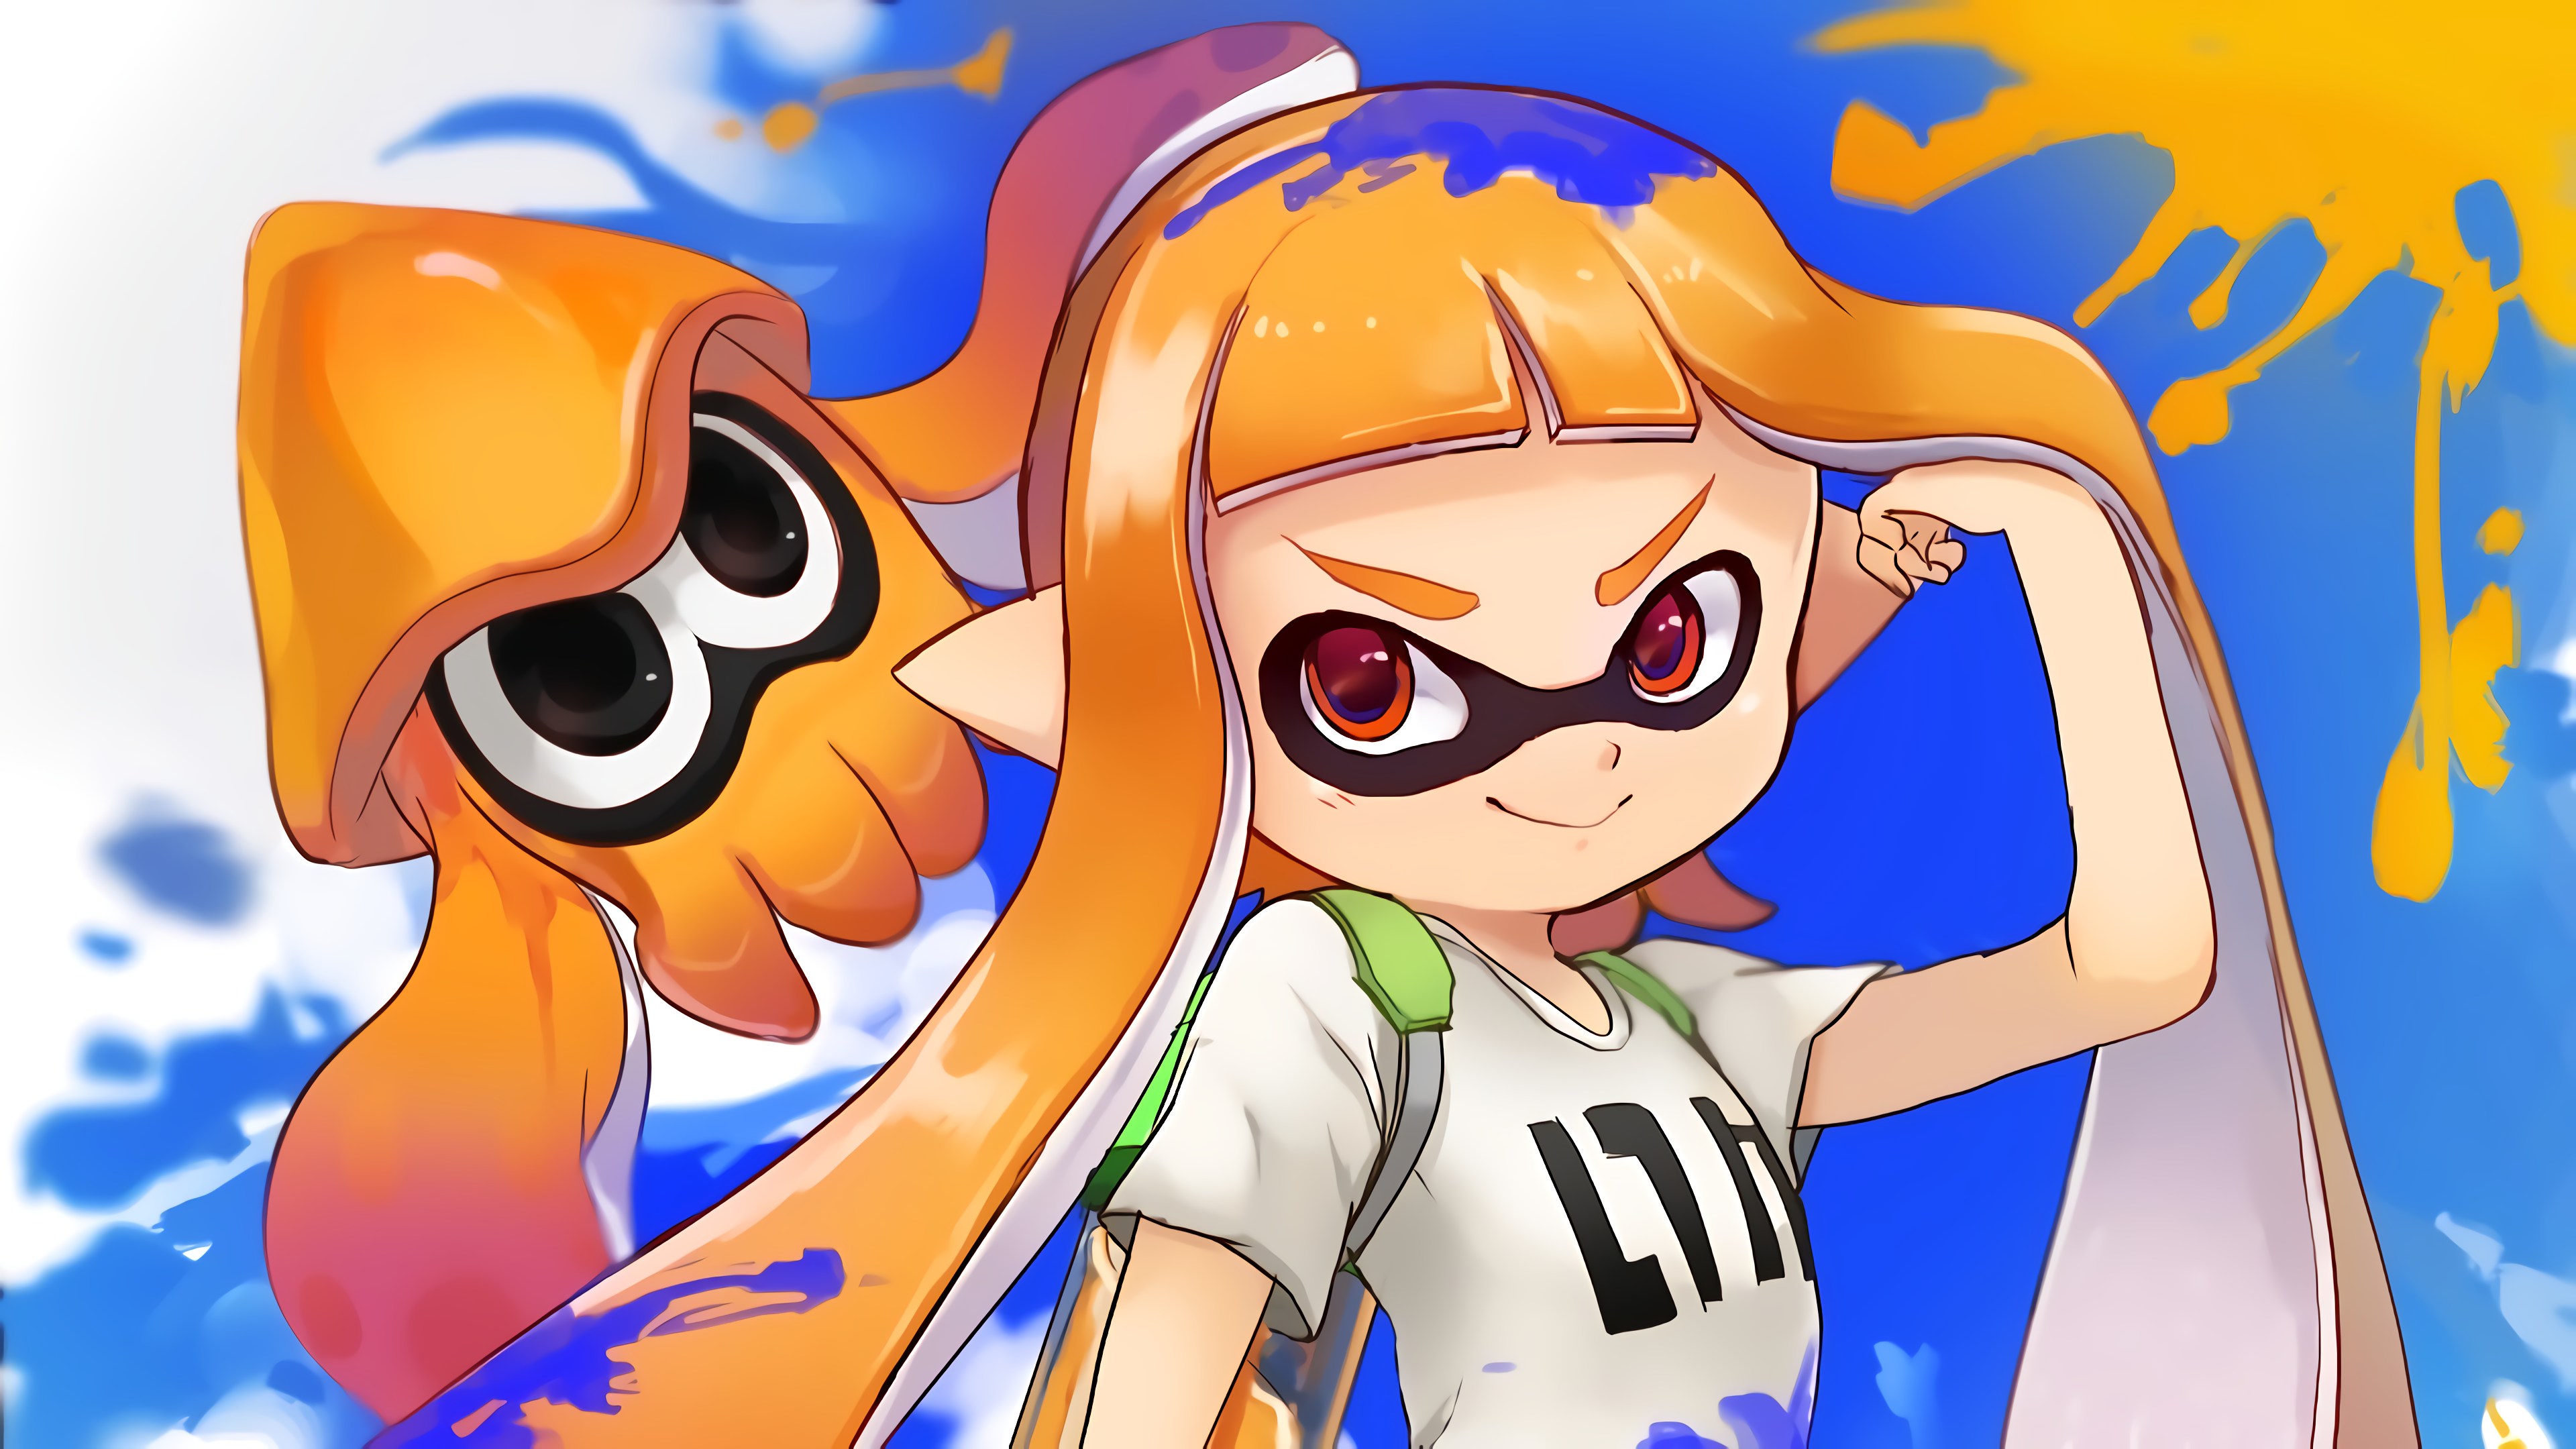 A collection of 43 Splatoon wallpaper I've gathered over the years that I thought I'd share